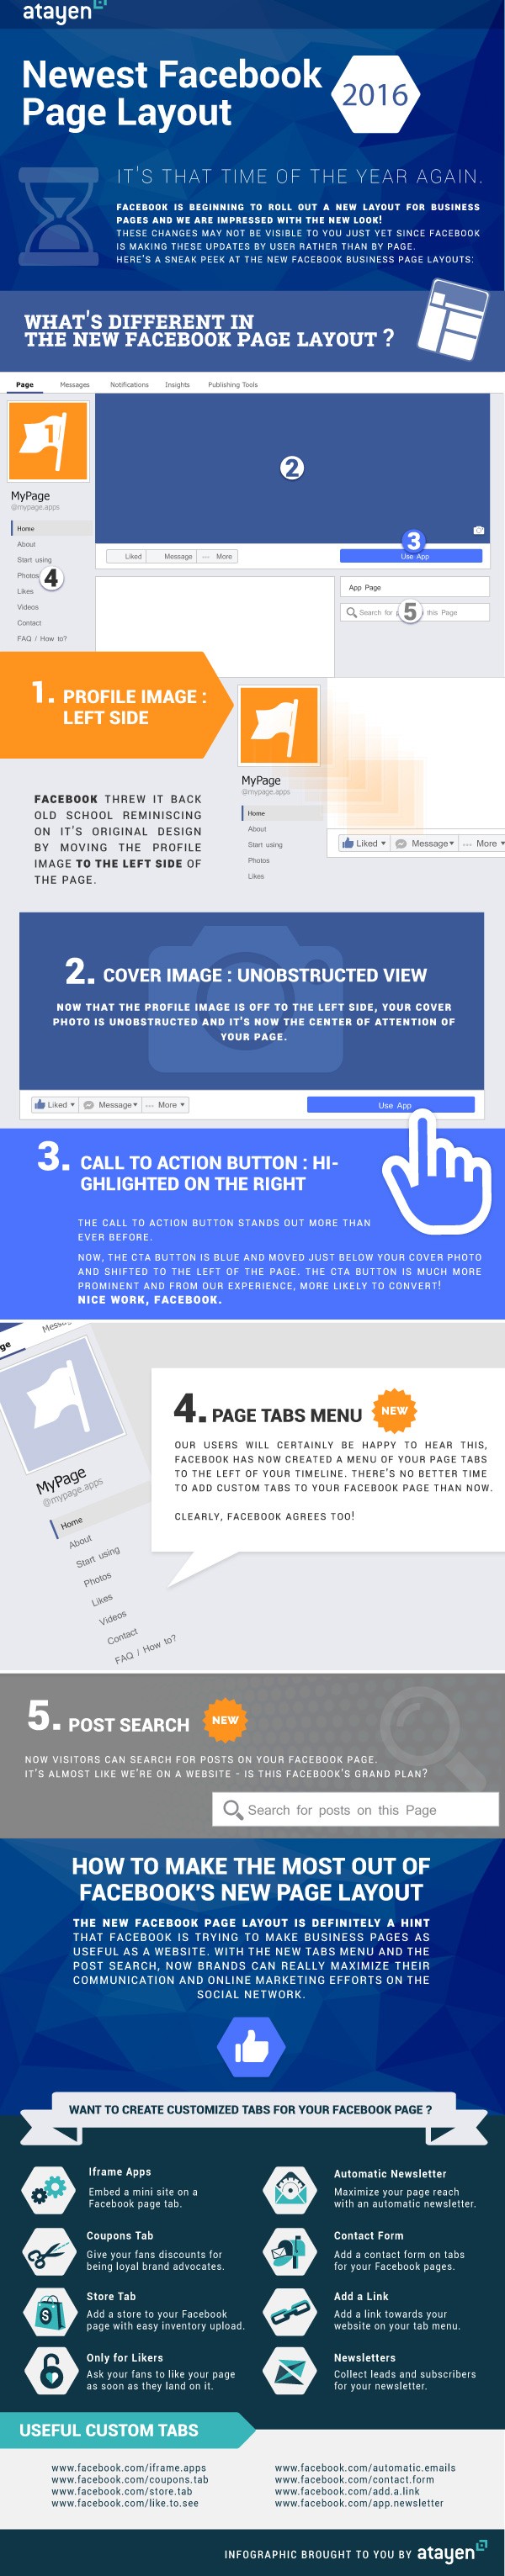 Infographic Facebook New Page Layout 2016